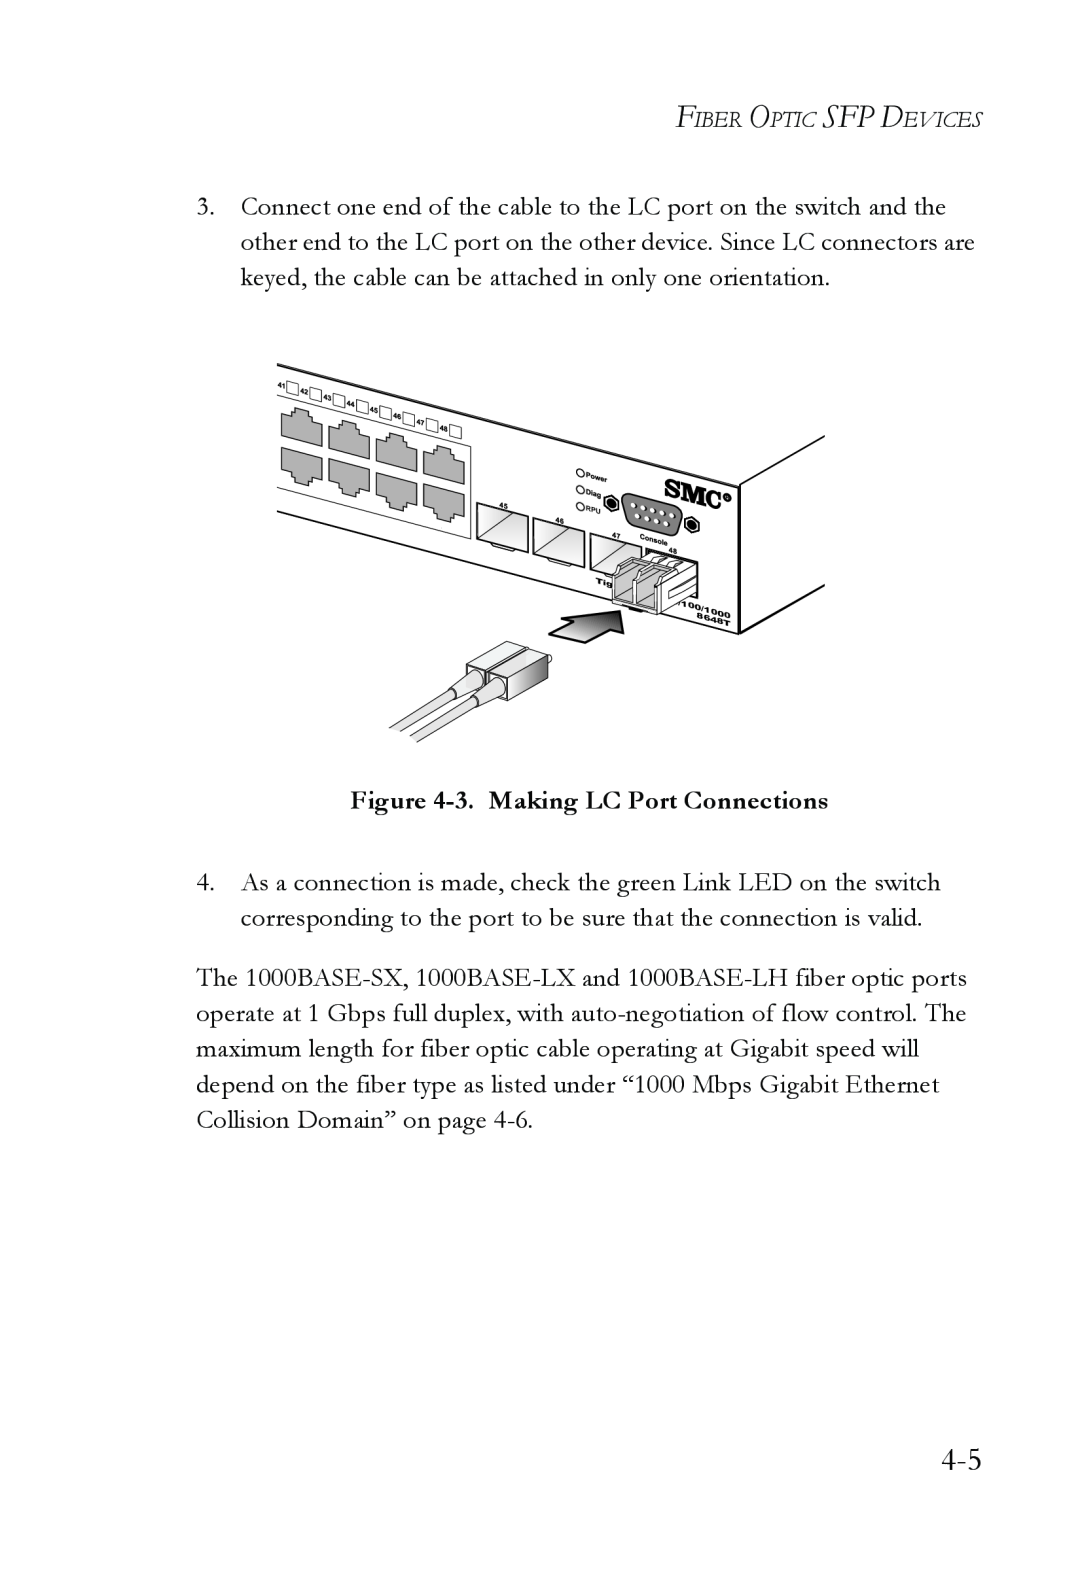 SMC Networks SMC8624T manual 3. Making LC Port Connections, Fiber Optic Sfp Devices 